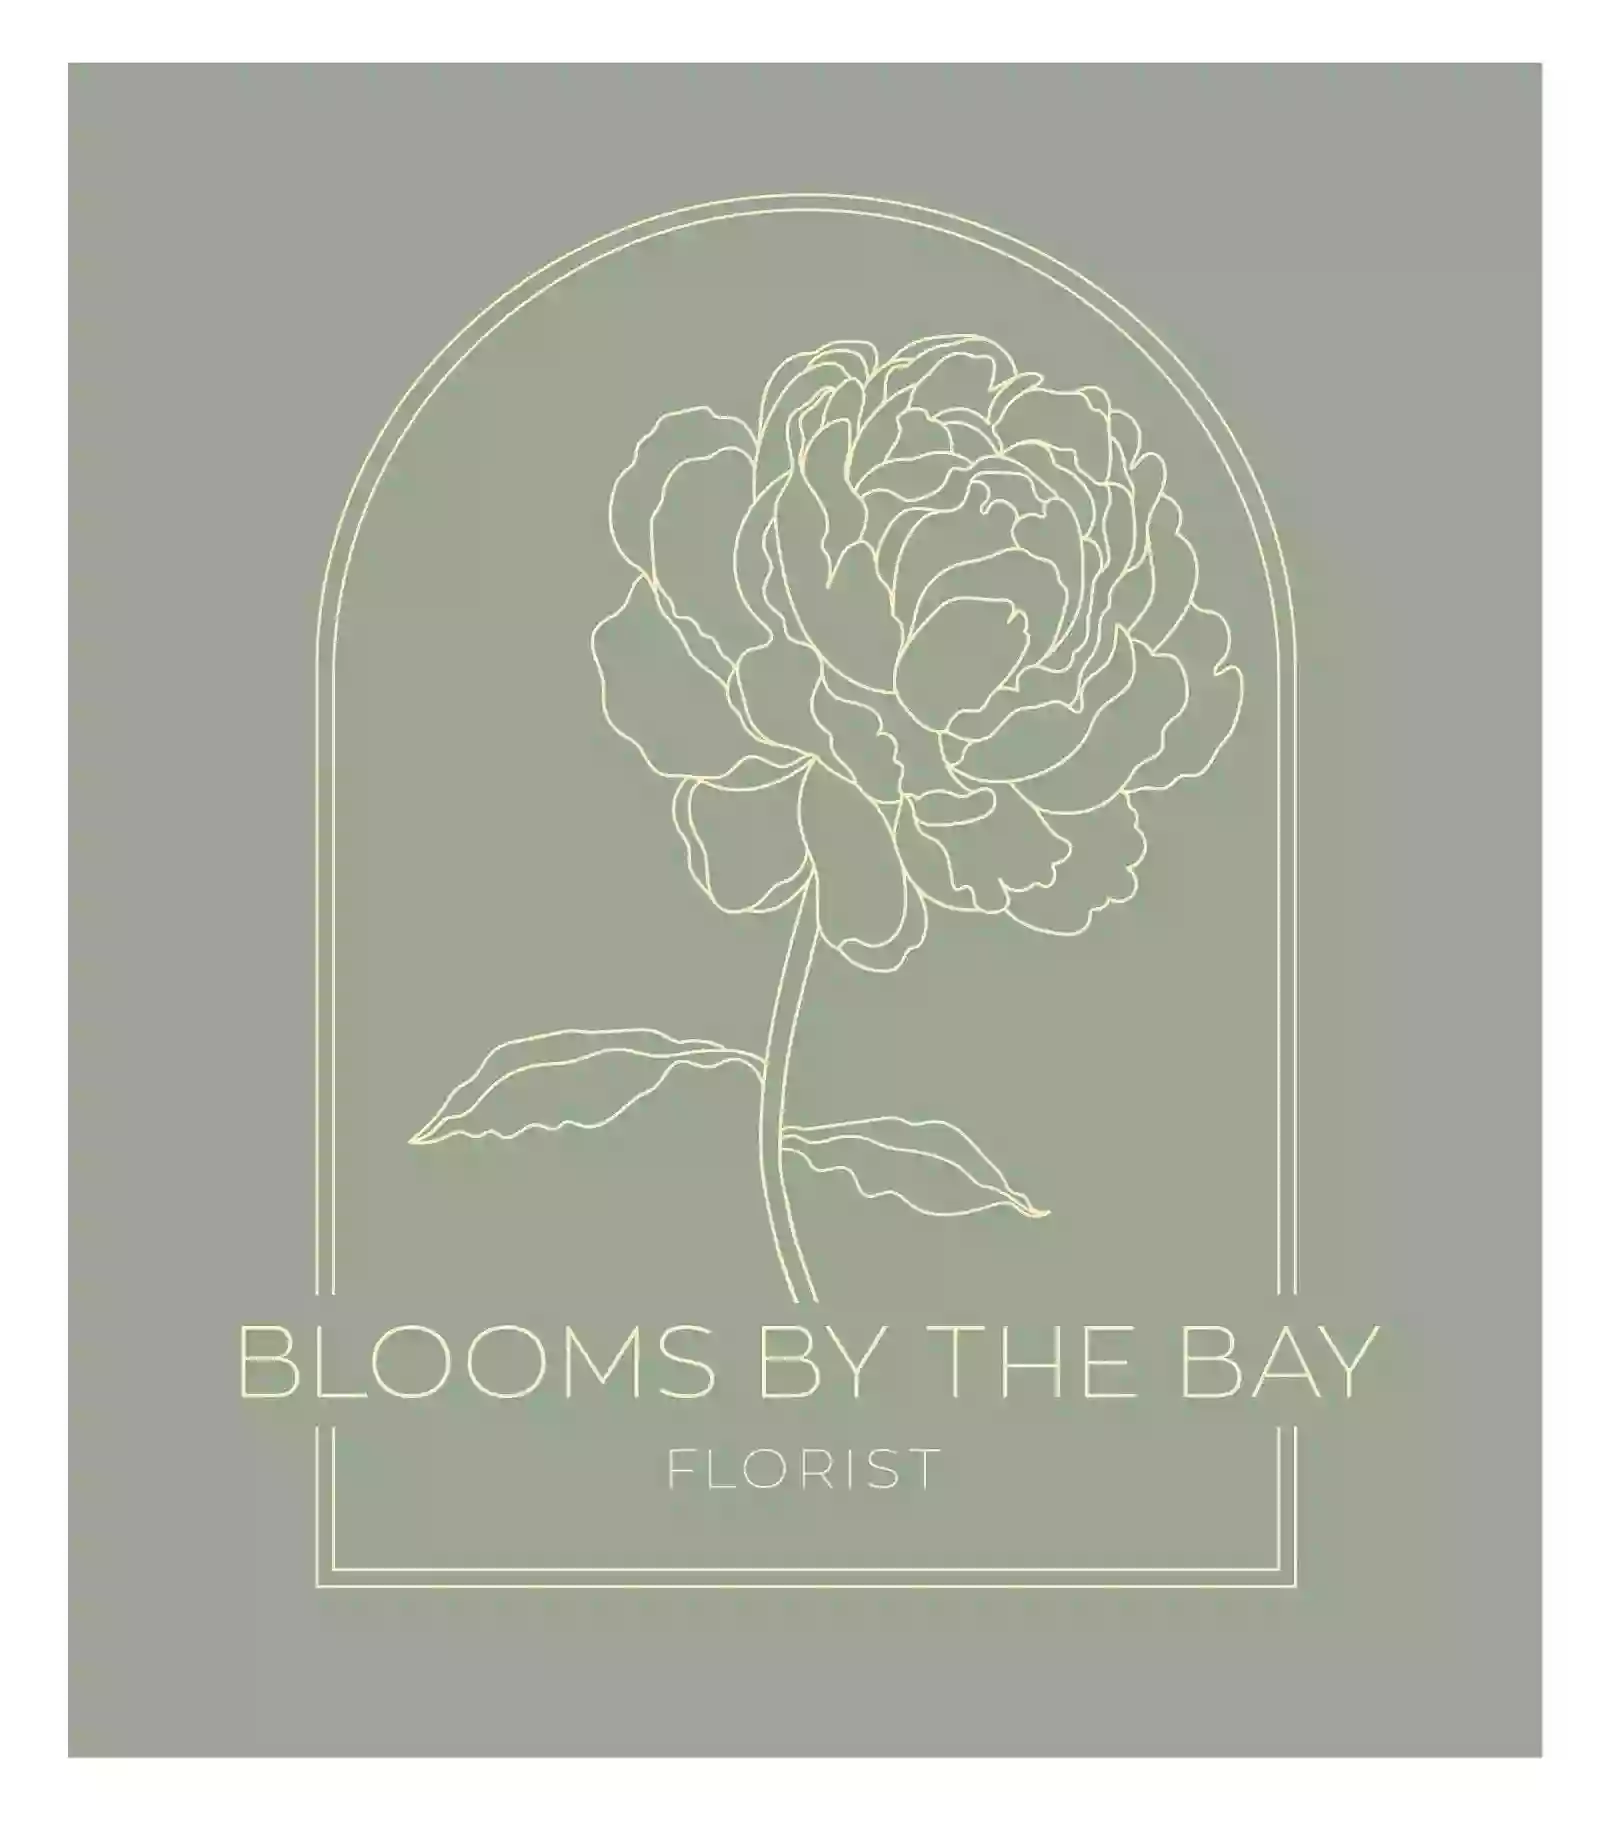 Blooms by the Bay